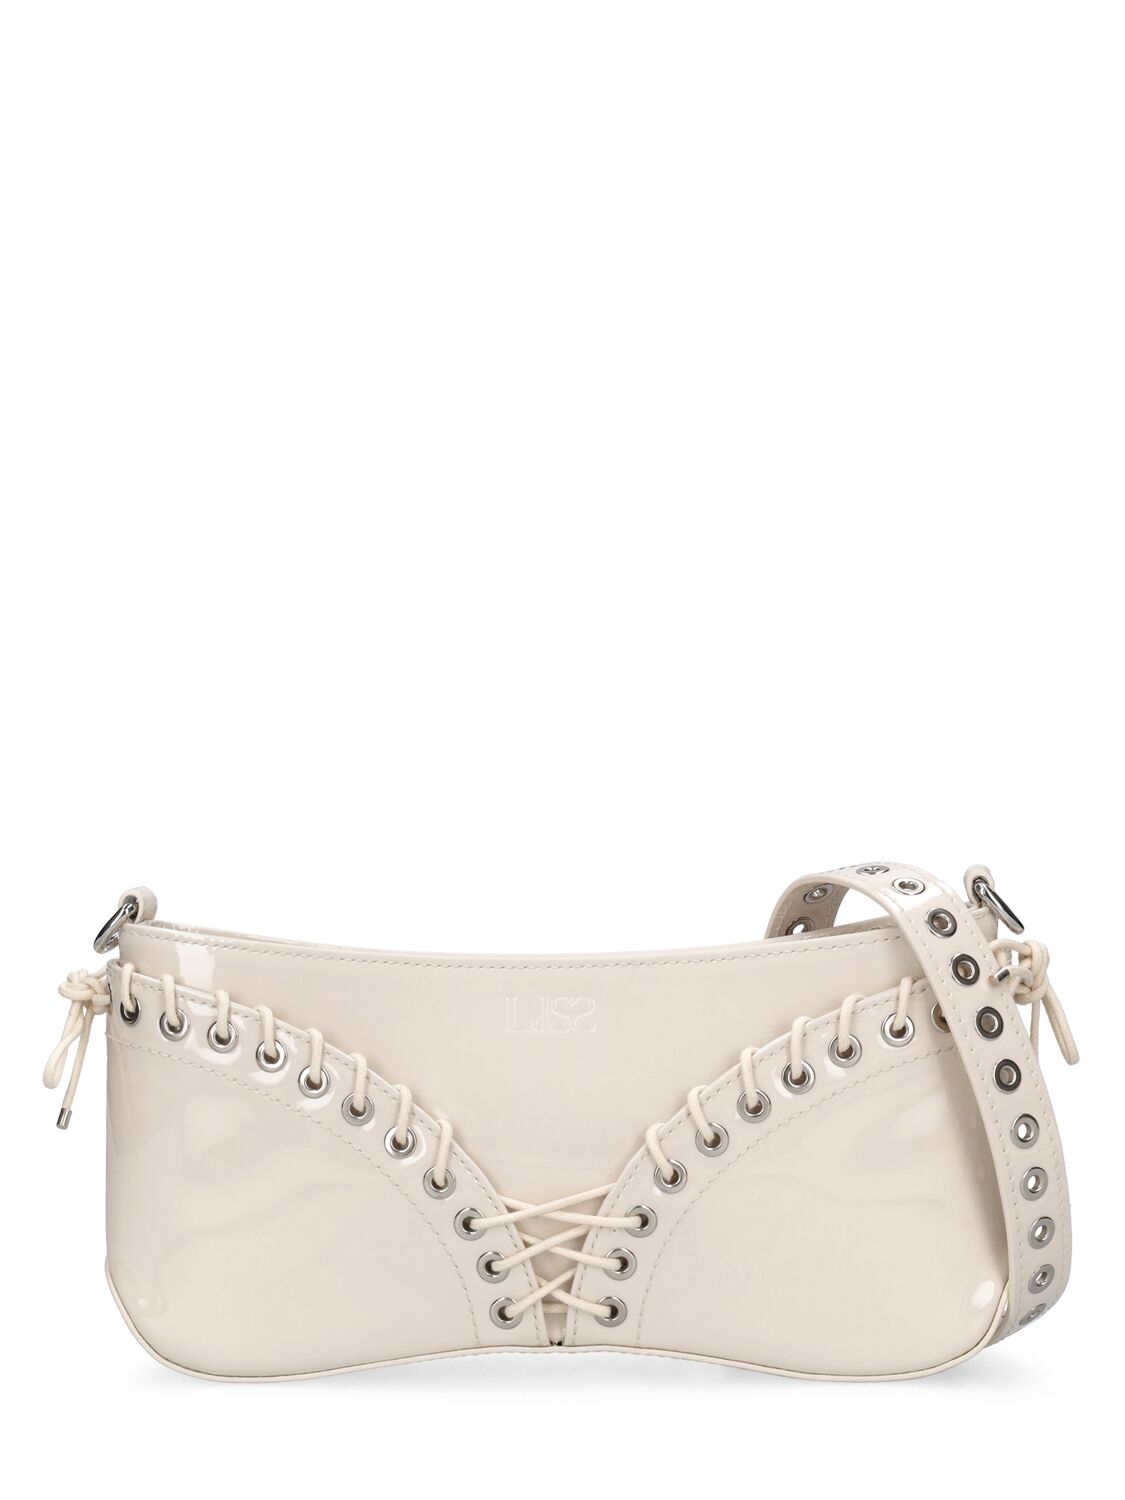 Image of Cleavage Patent Leather Shoulder Bag